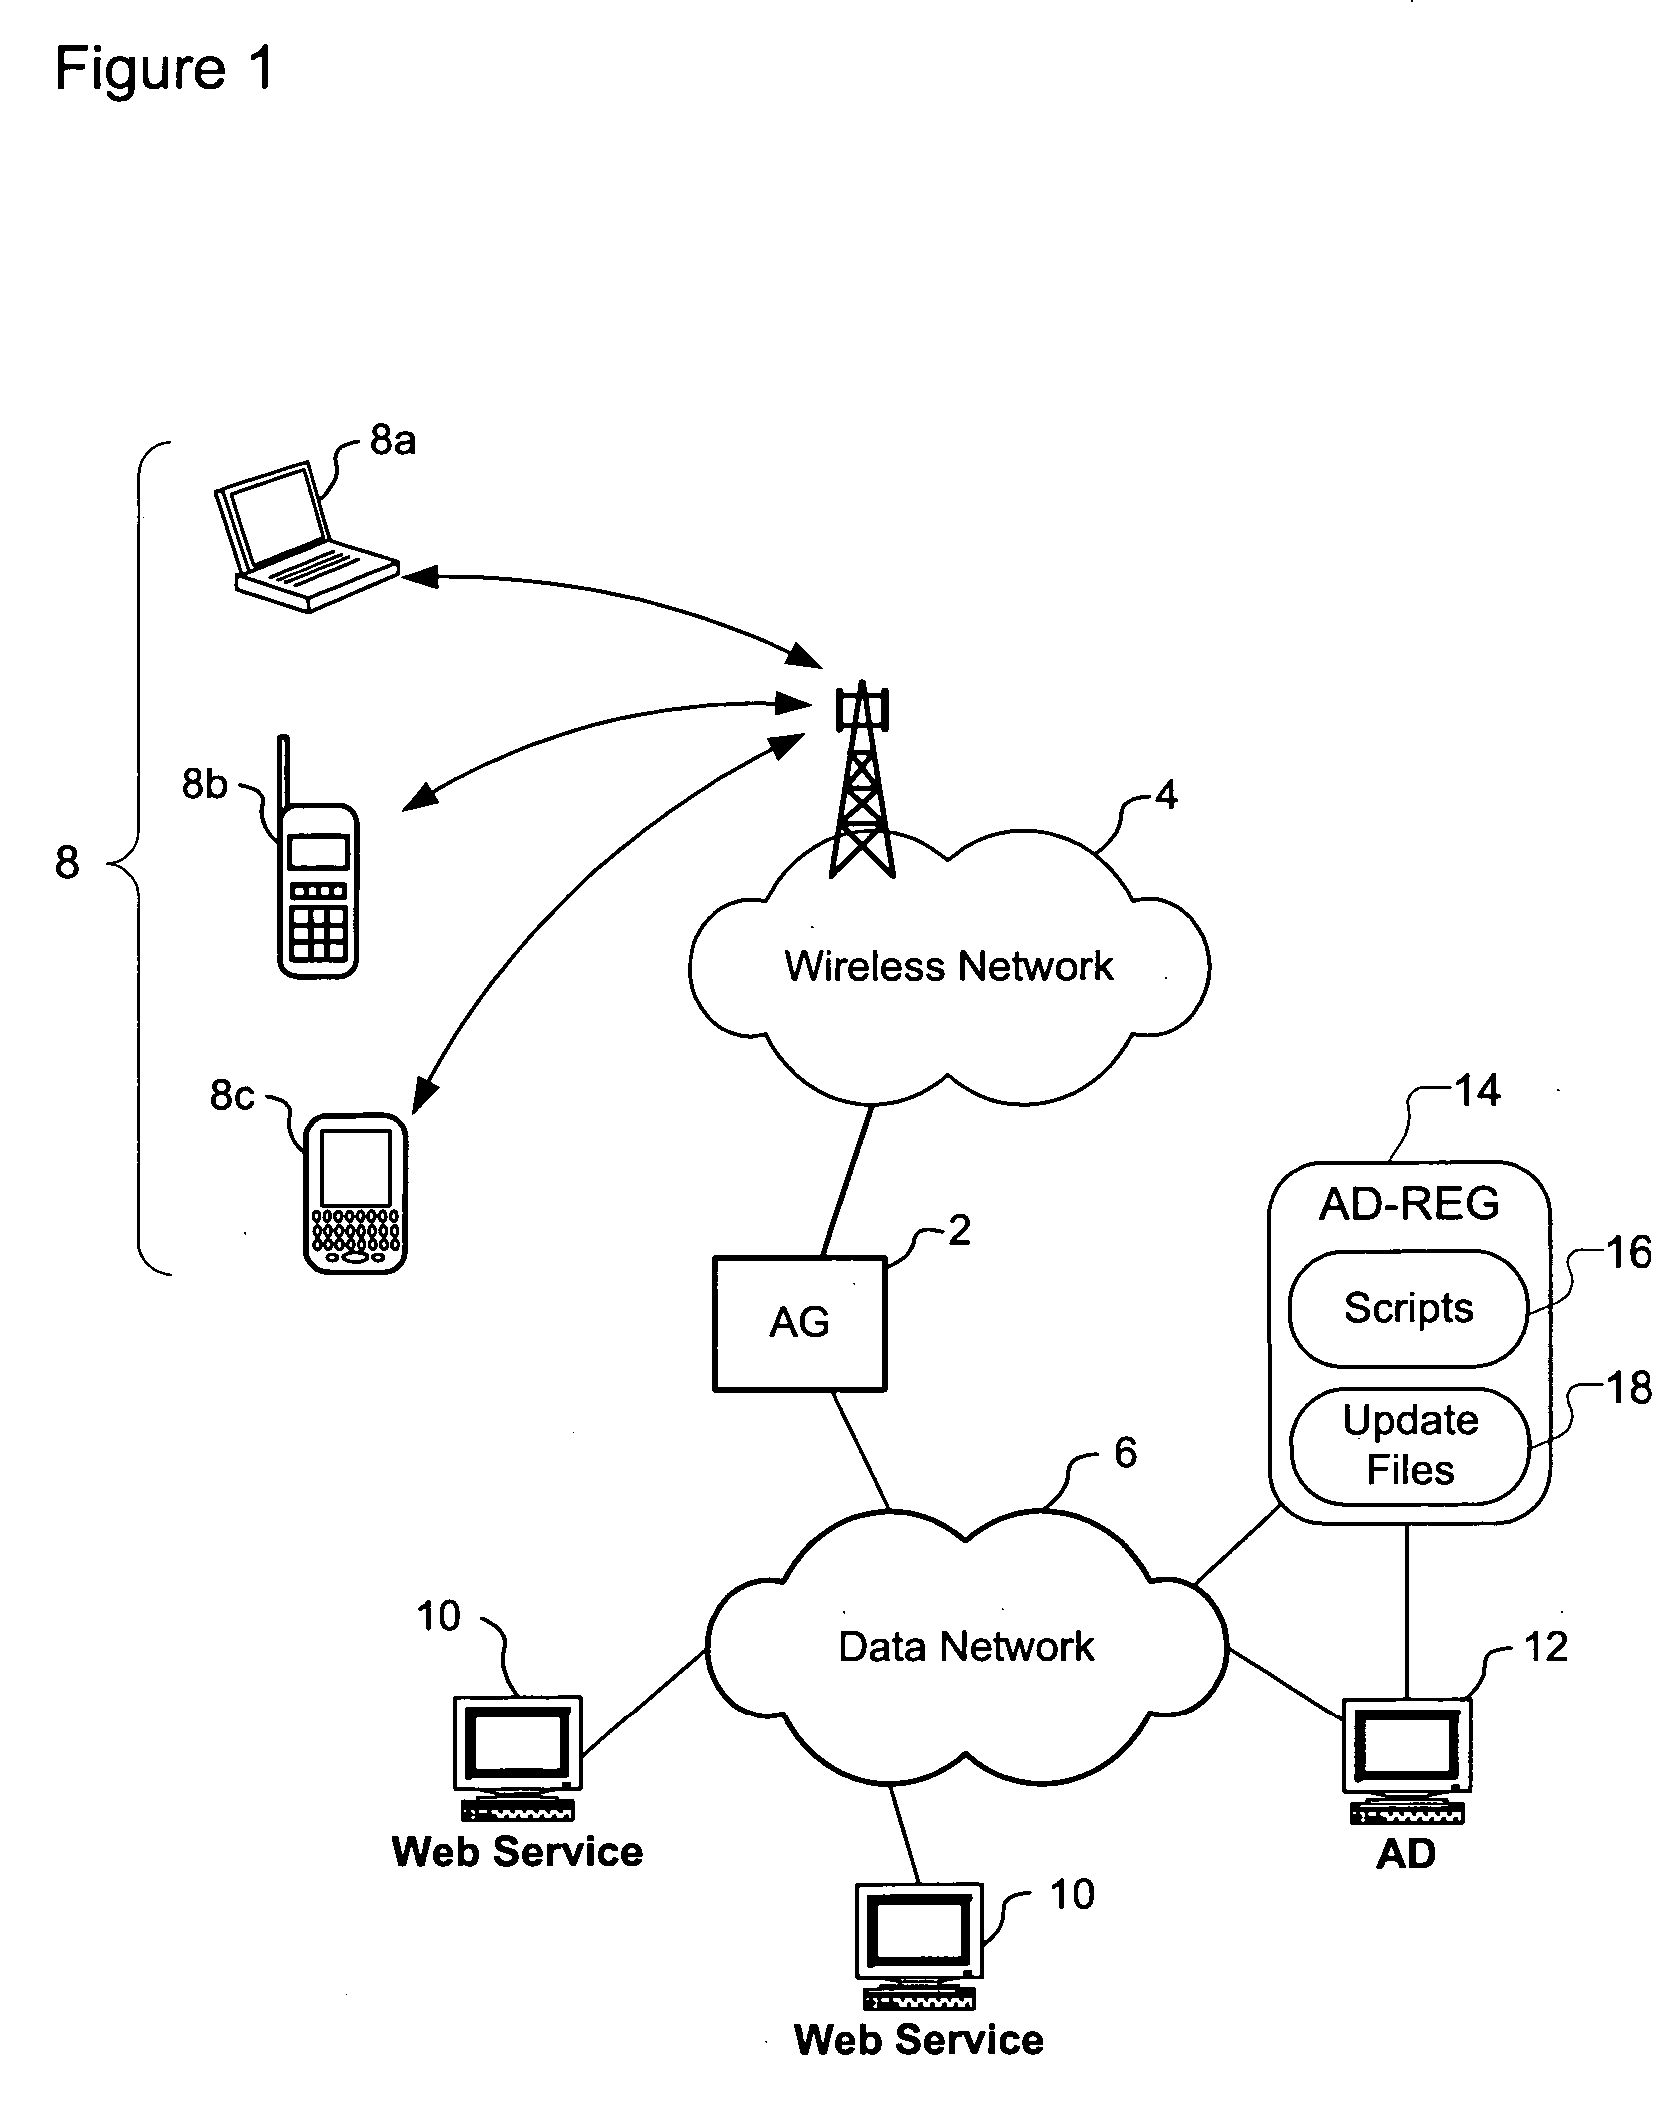 System and method for enabling assisted visual development of workflow for application tasks